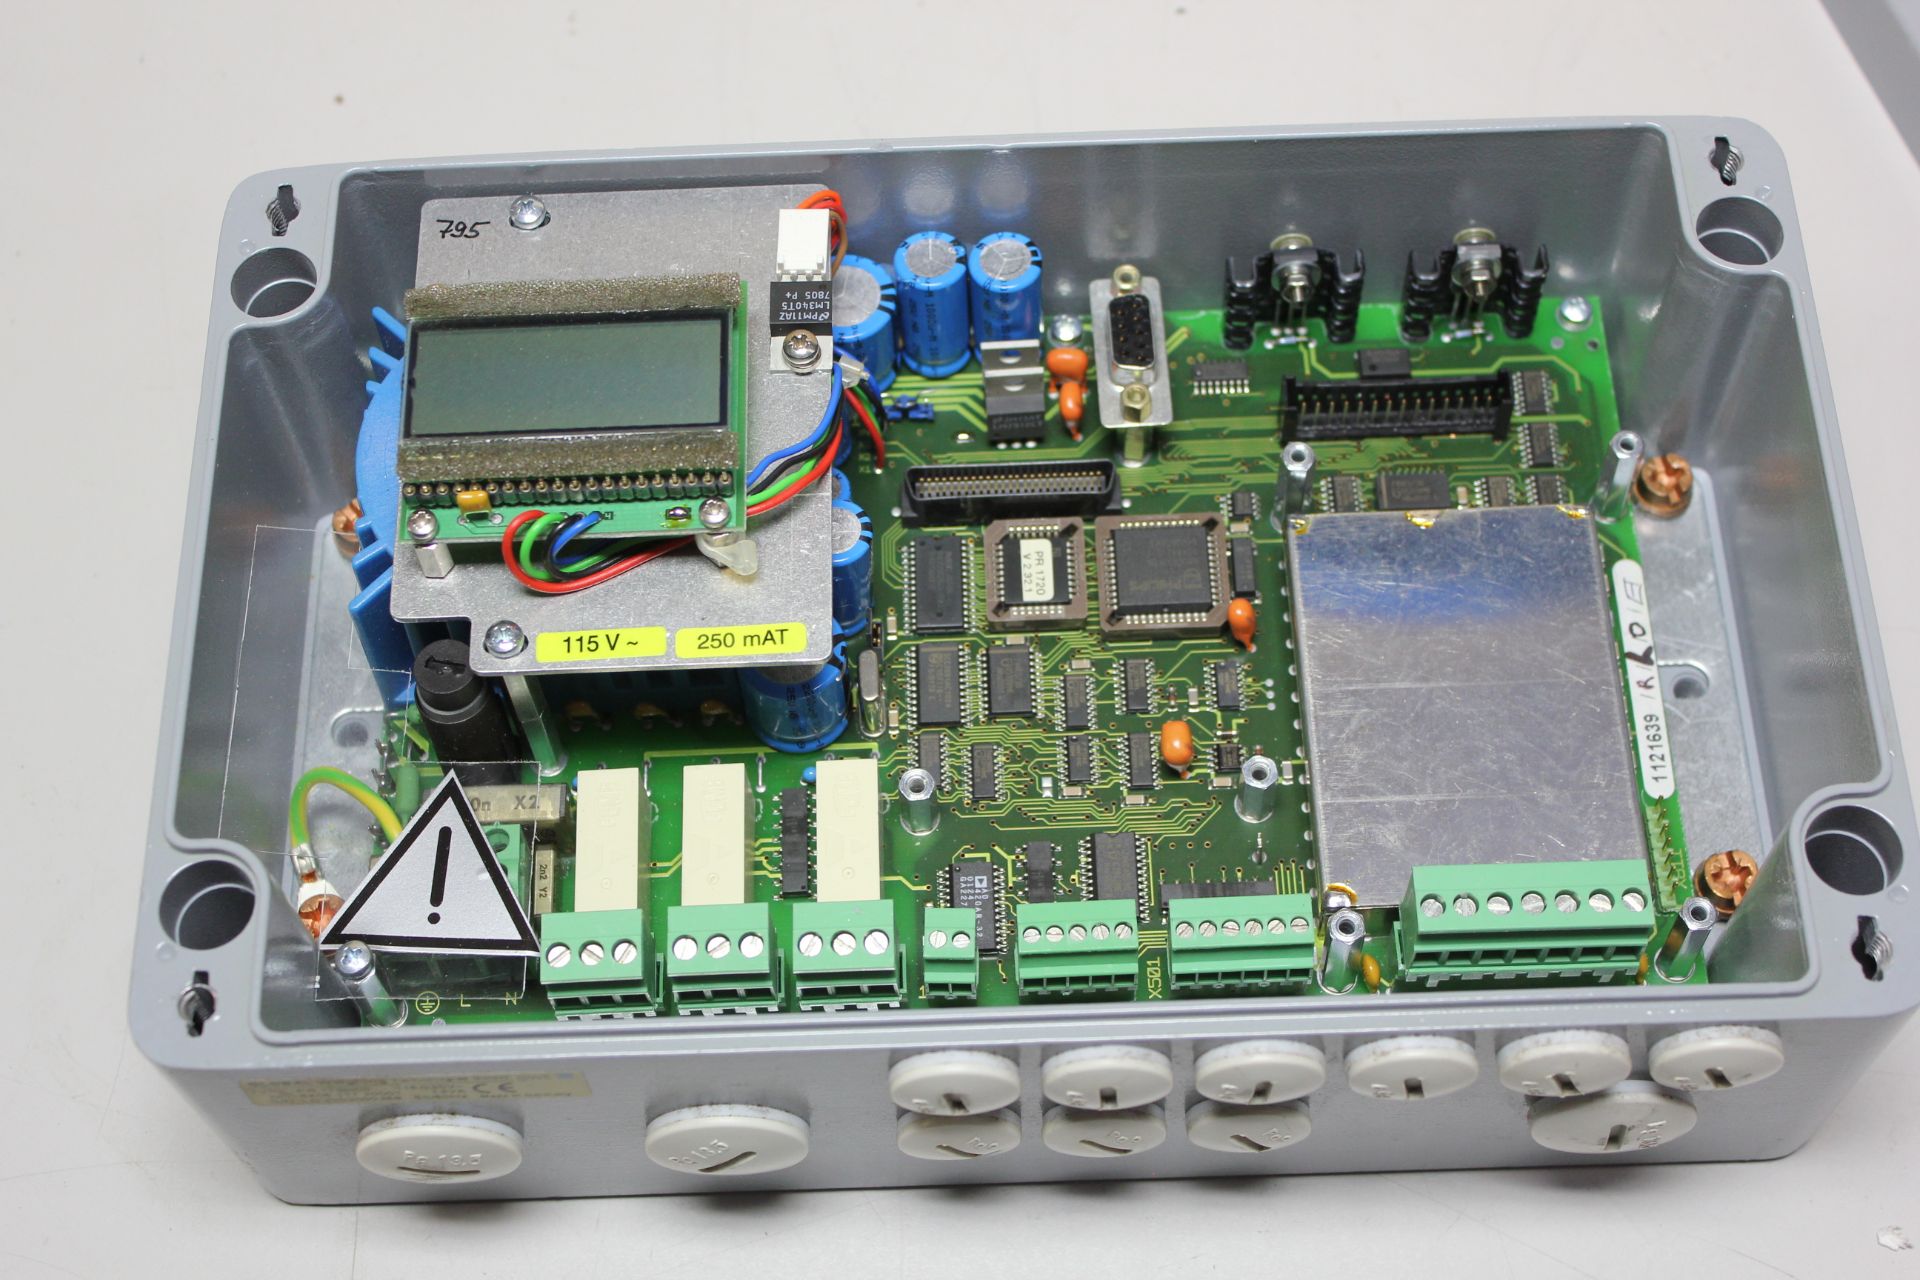 GLOBAL WEIGHING LOAD CELL DIGITAL FIELDBUS TRANSMITTER - Image 4 of 6